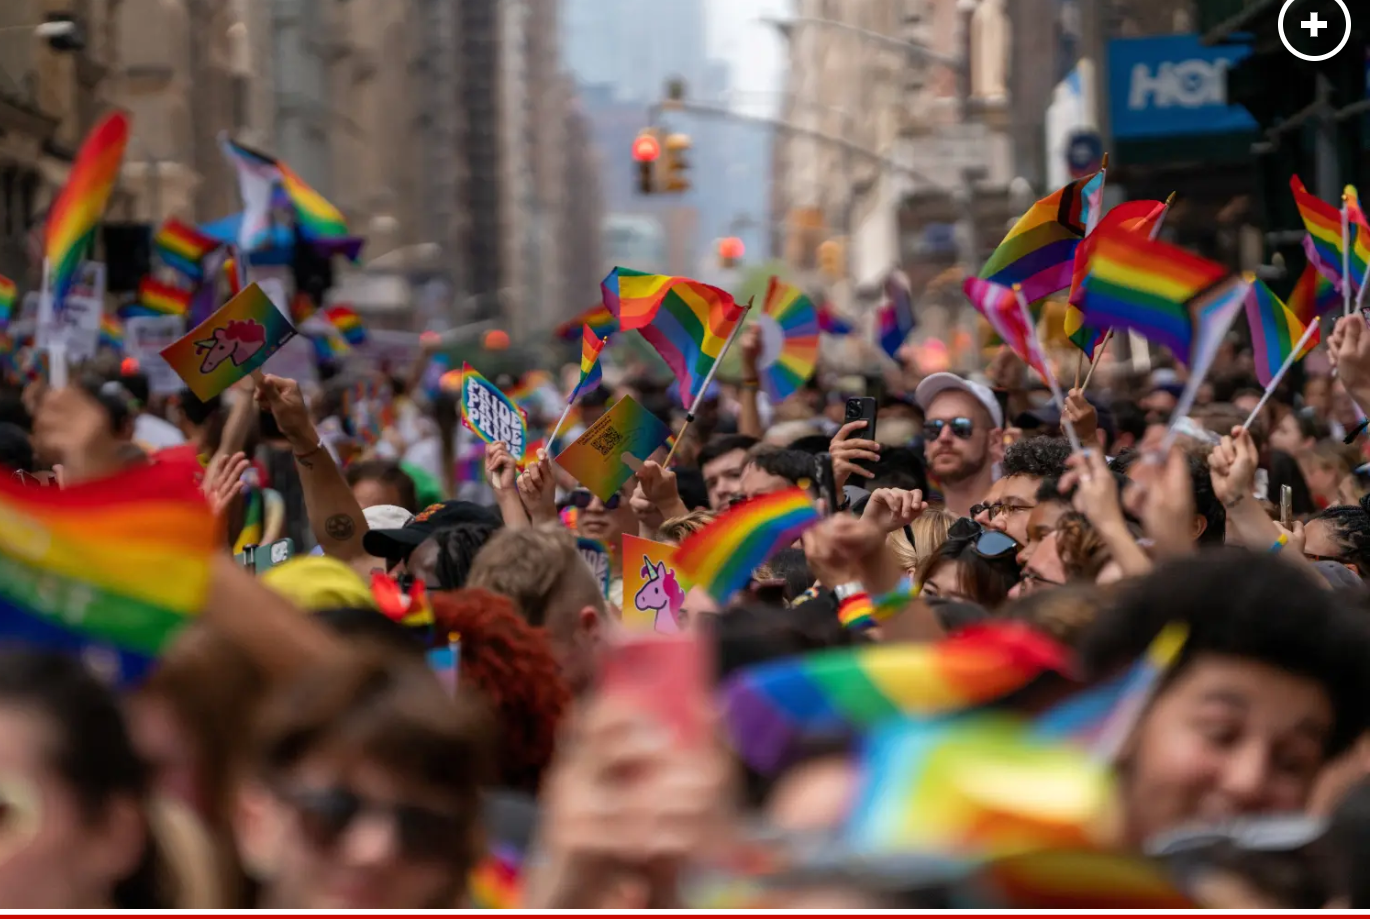 NYC Pride Parade revelers sound off on controversial Drag March chant: ‘Just adding fuel to the fire